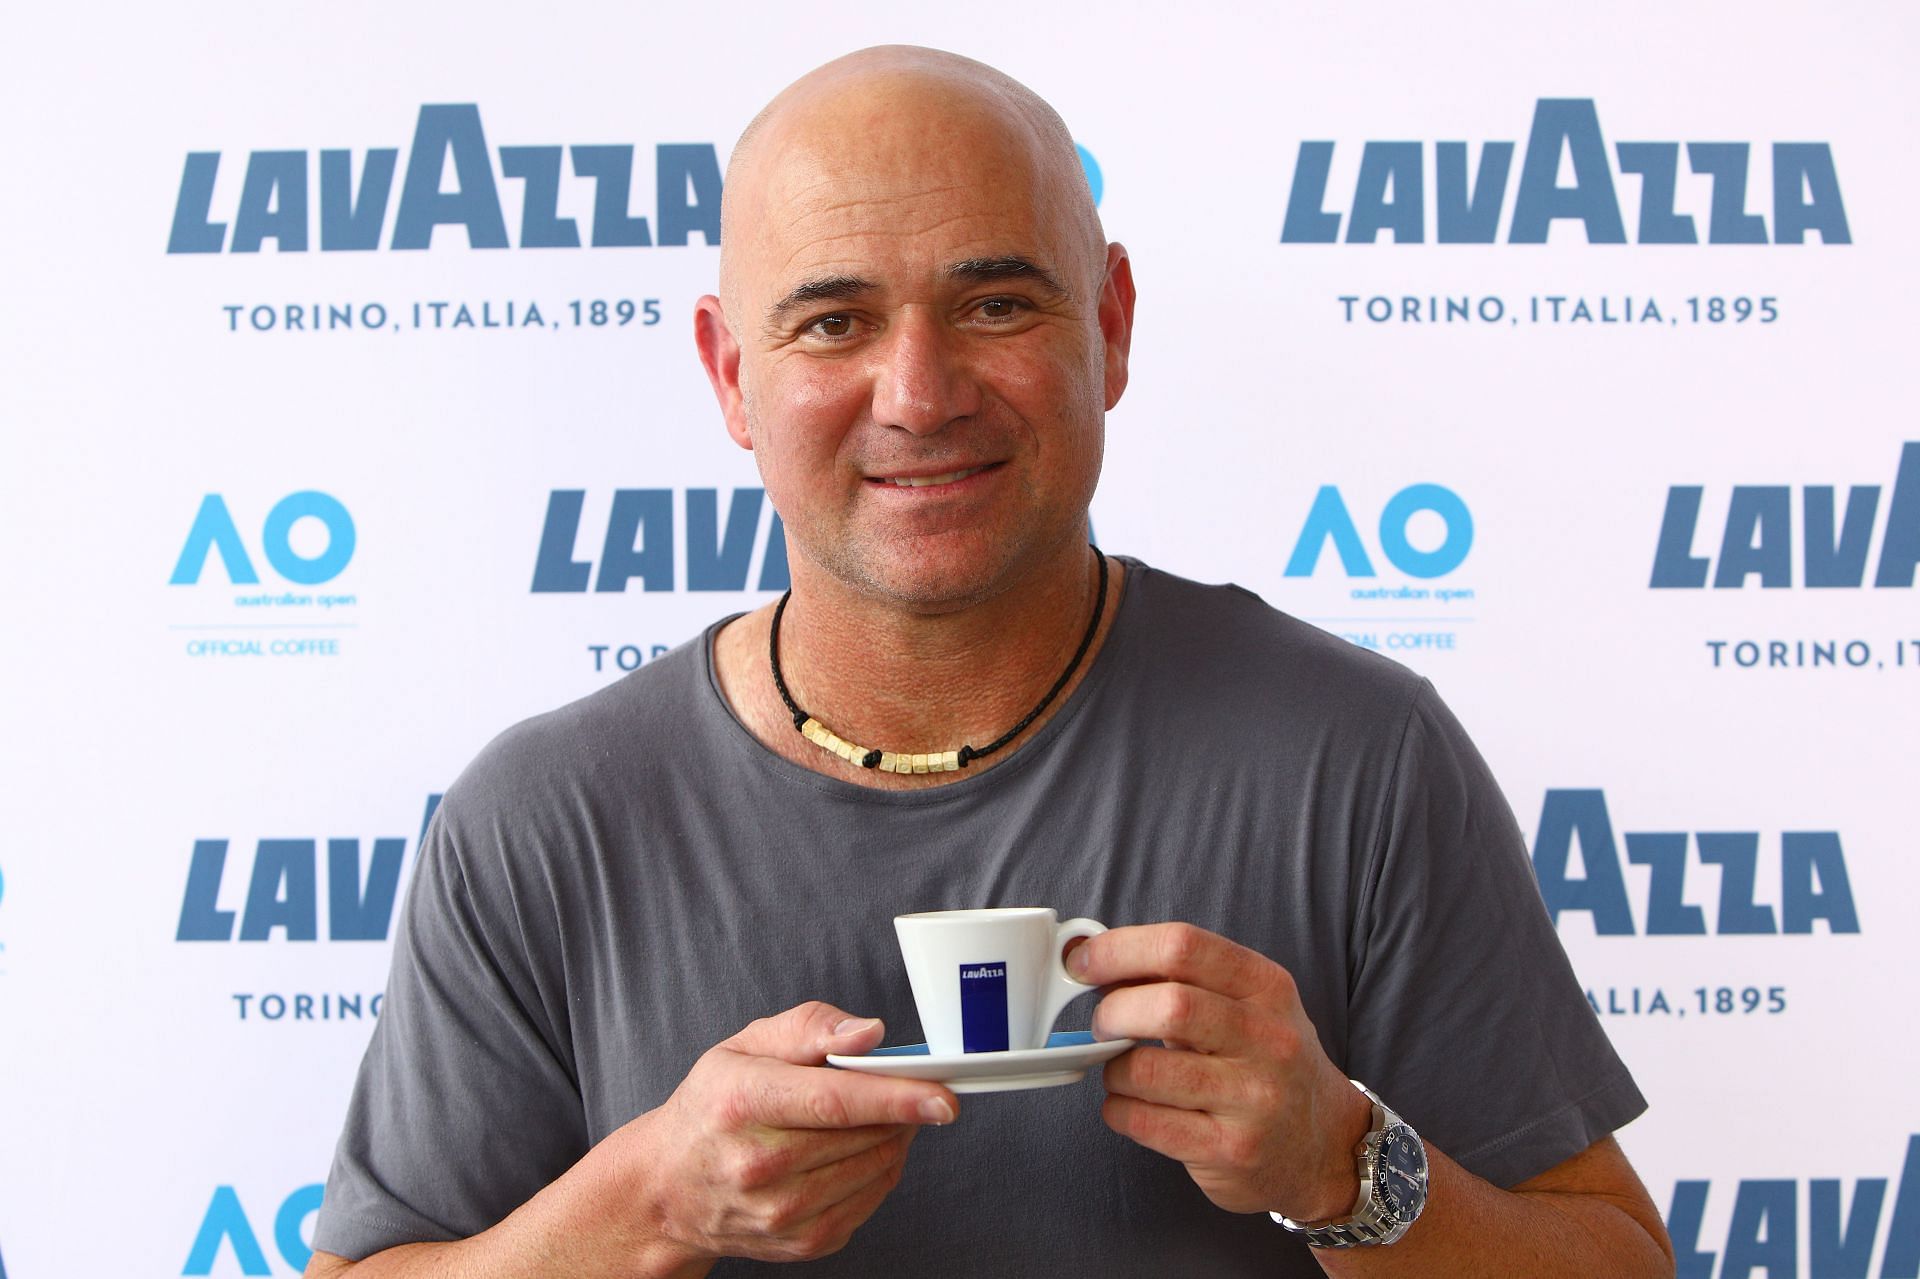 Andre Agassi at the 2019 Australian Open